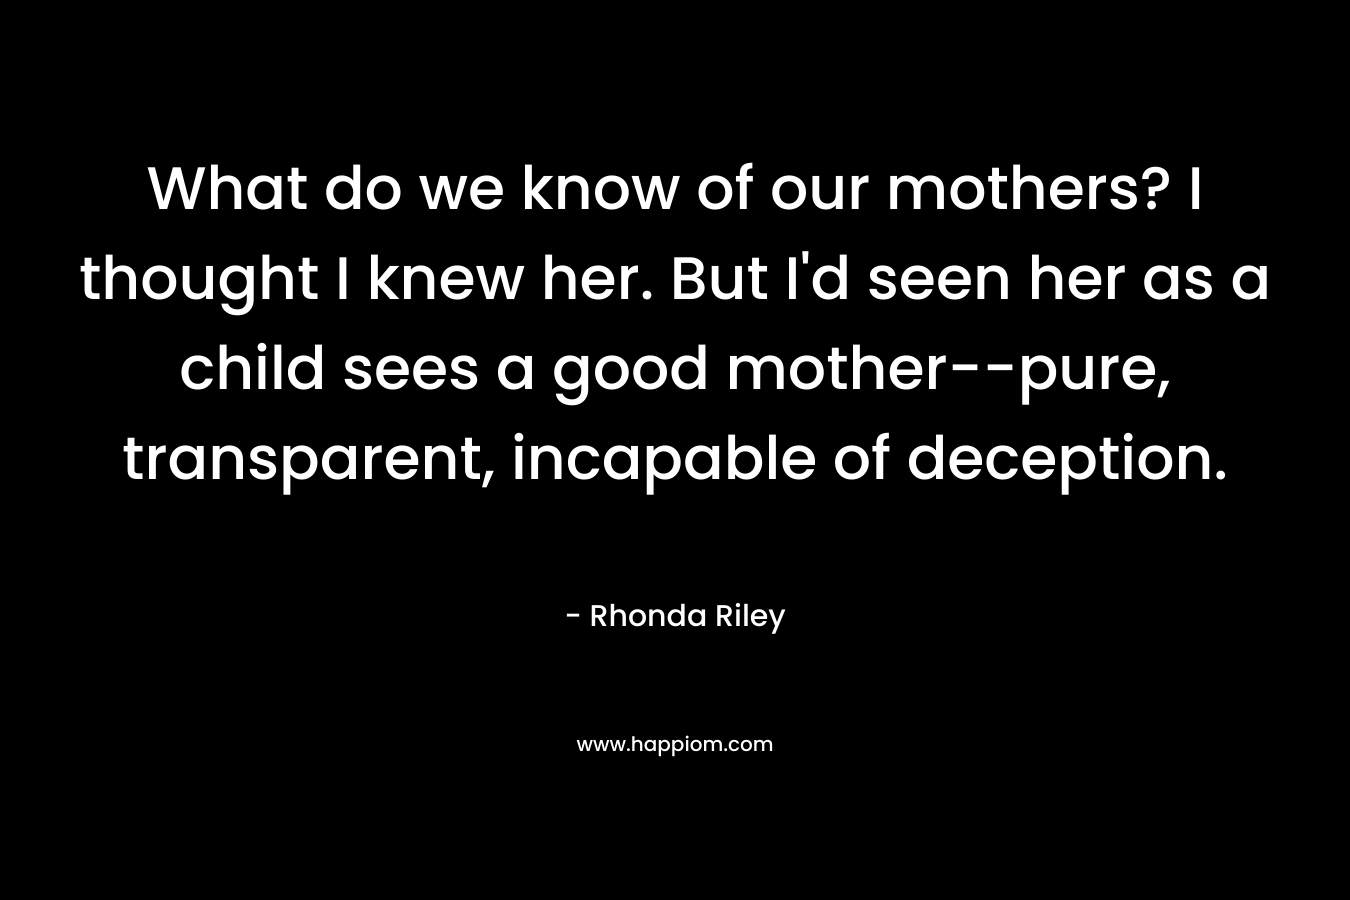 What do we know of our mothers? I thought I knew her. But I'd seen her as a child sees a good mother--pure, transparent, incapable of deception.